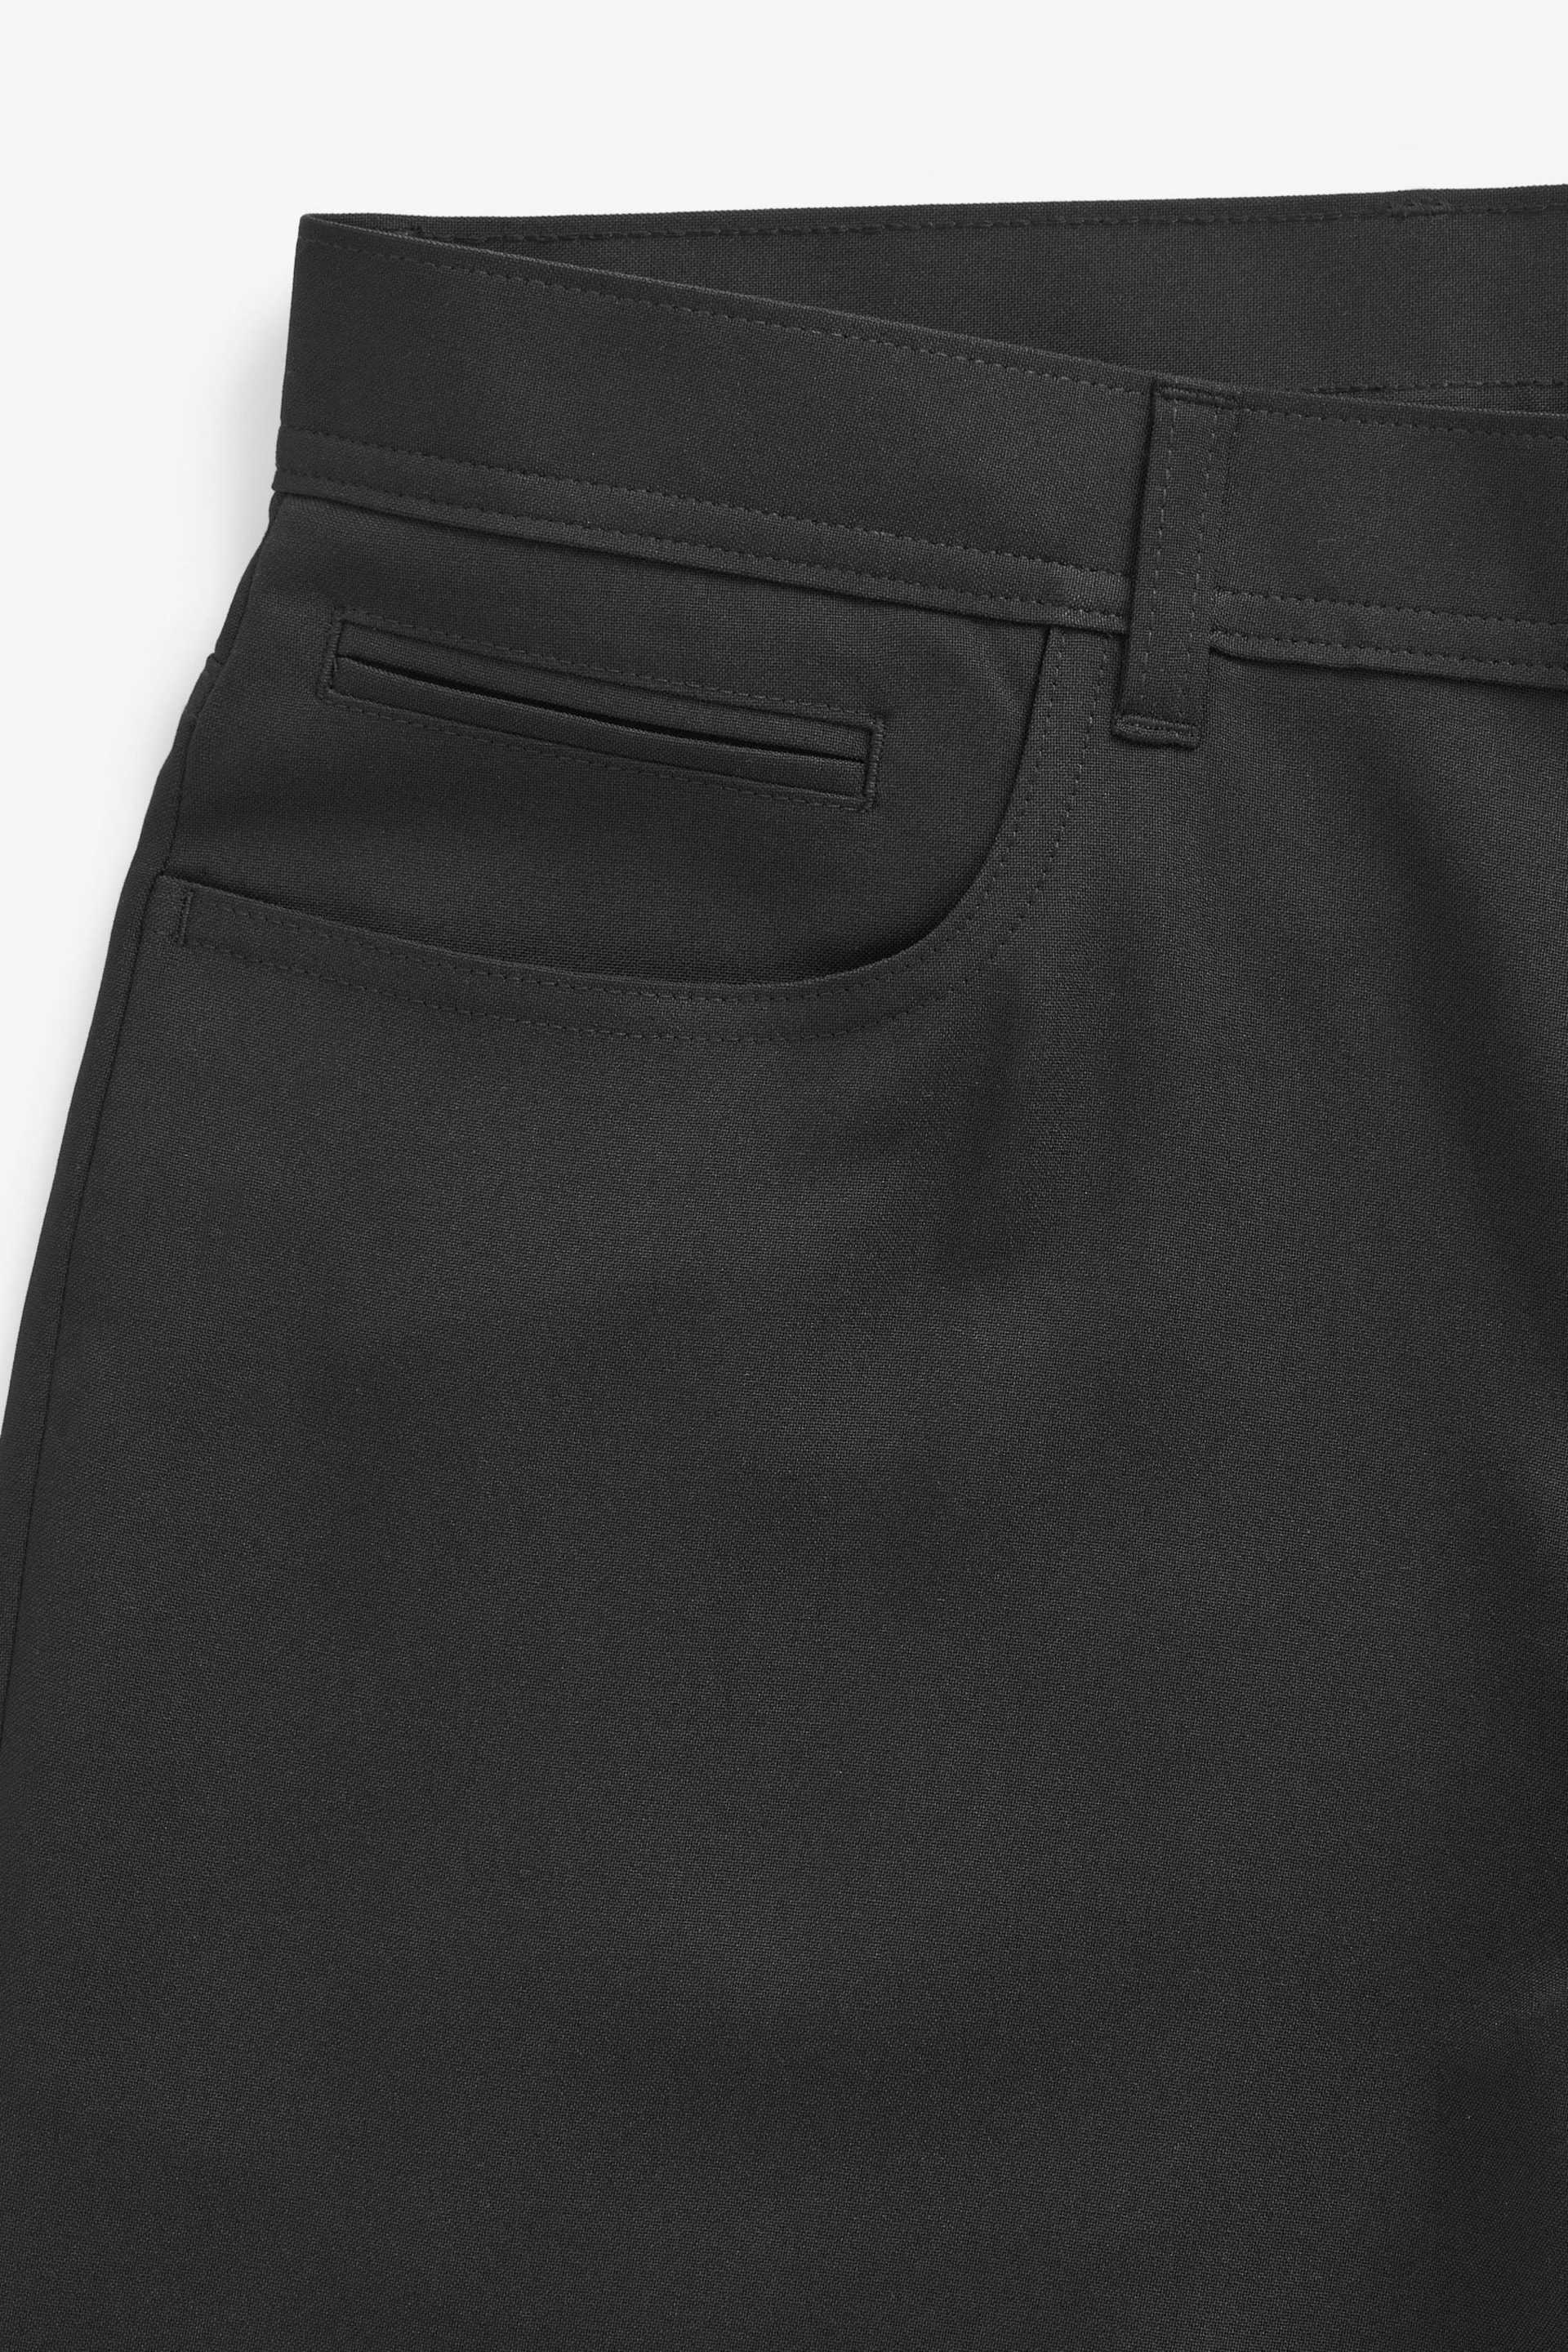 Black Jean Style Machine Washable Plain Front Smart Trousers - Image 8 of 10